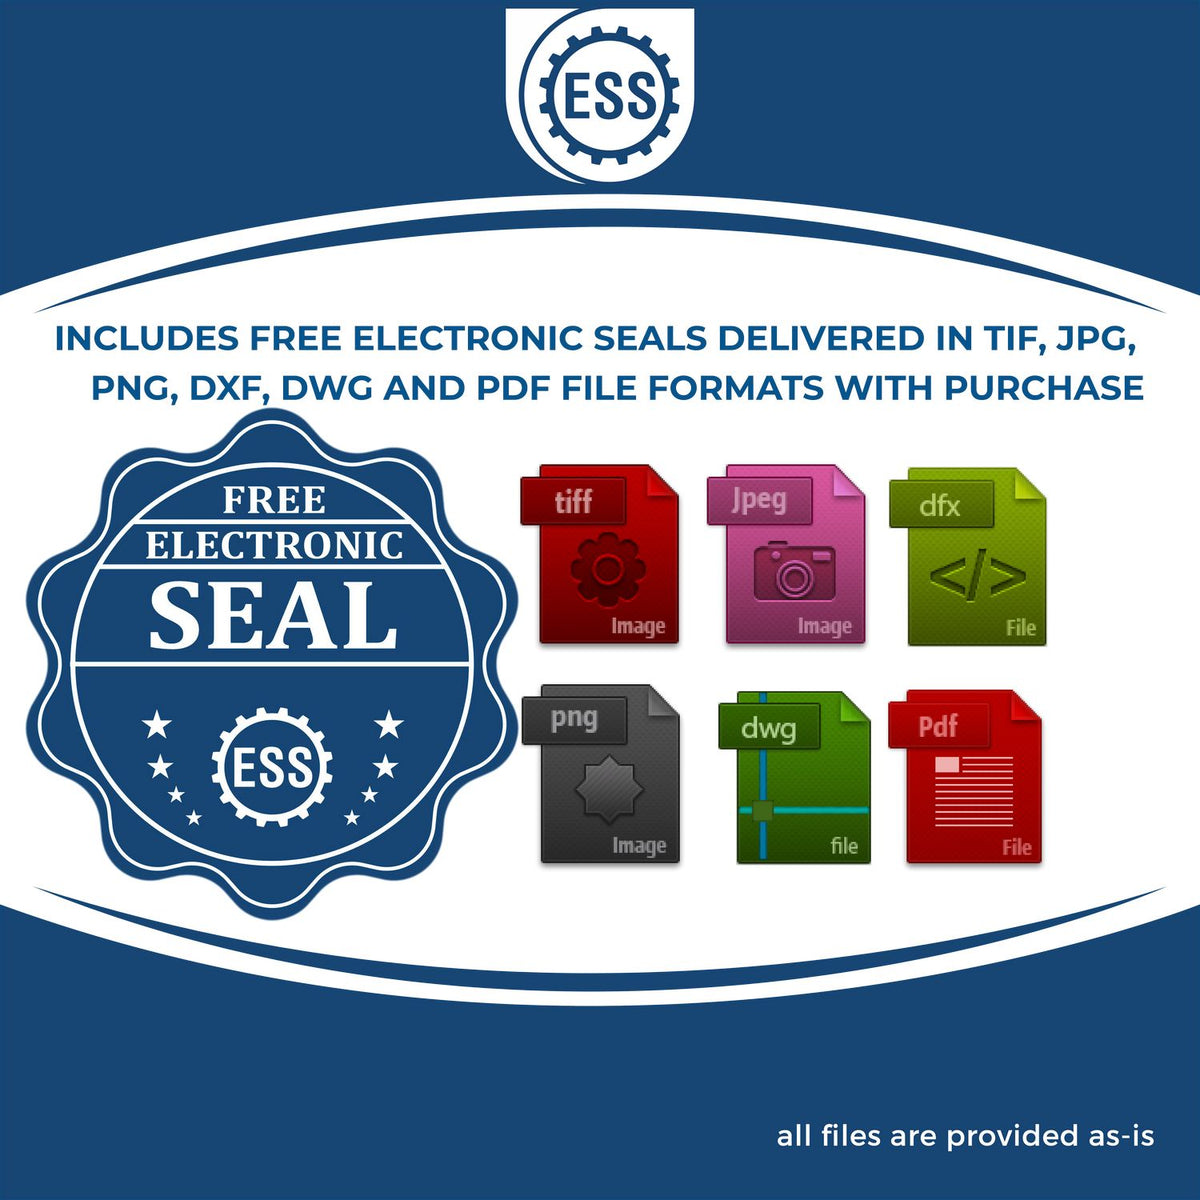 An infographic for the free electronic seal for the State of North Dakota Long Reach Architectural Embossing Seal illustrating the different file type icons such as DXF, DWG, TIF, JPG and PNG.